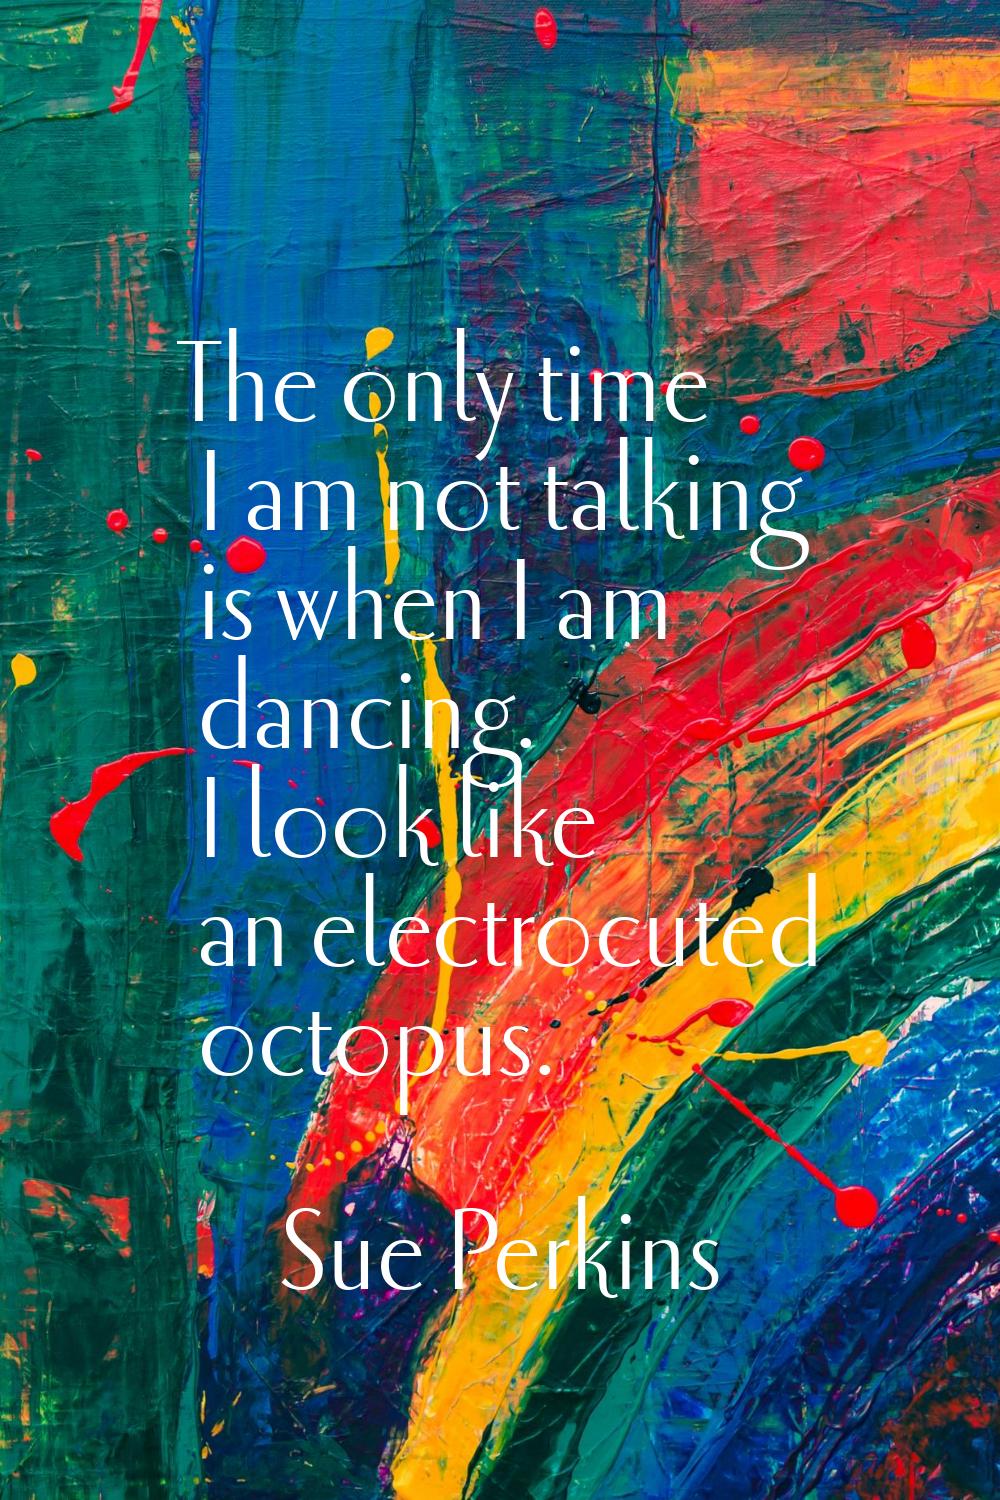 The only time I am not talking is when I am dancing. I look like an electrocuted octopus.